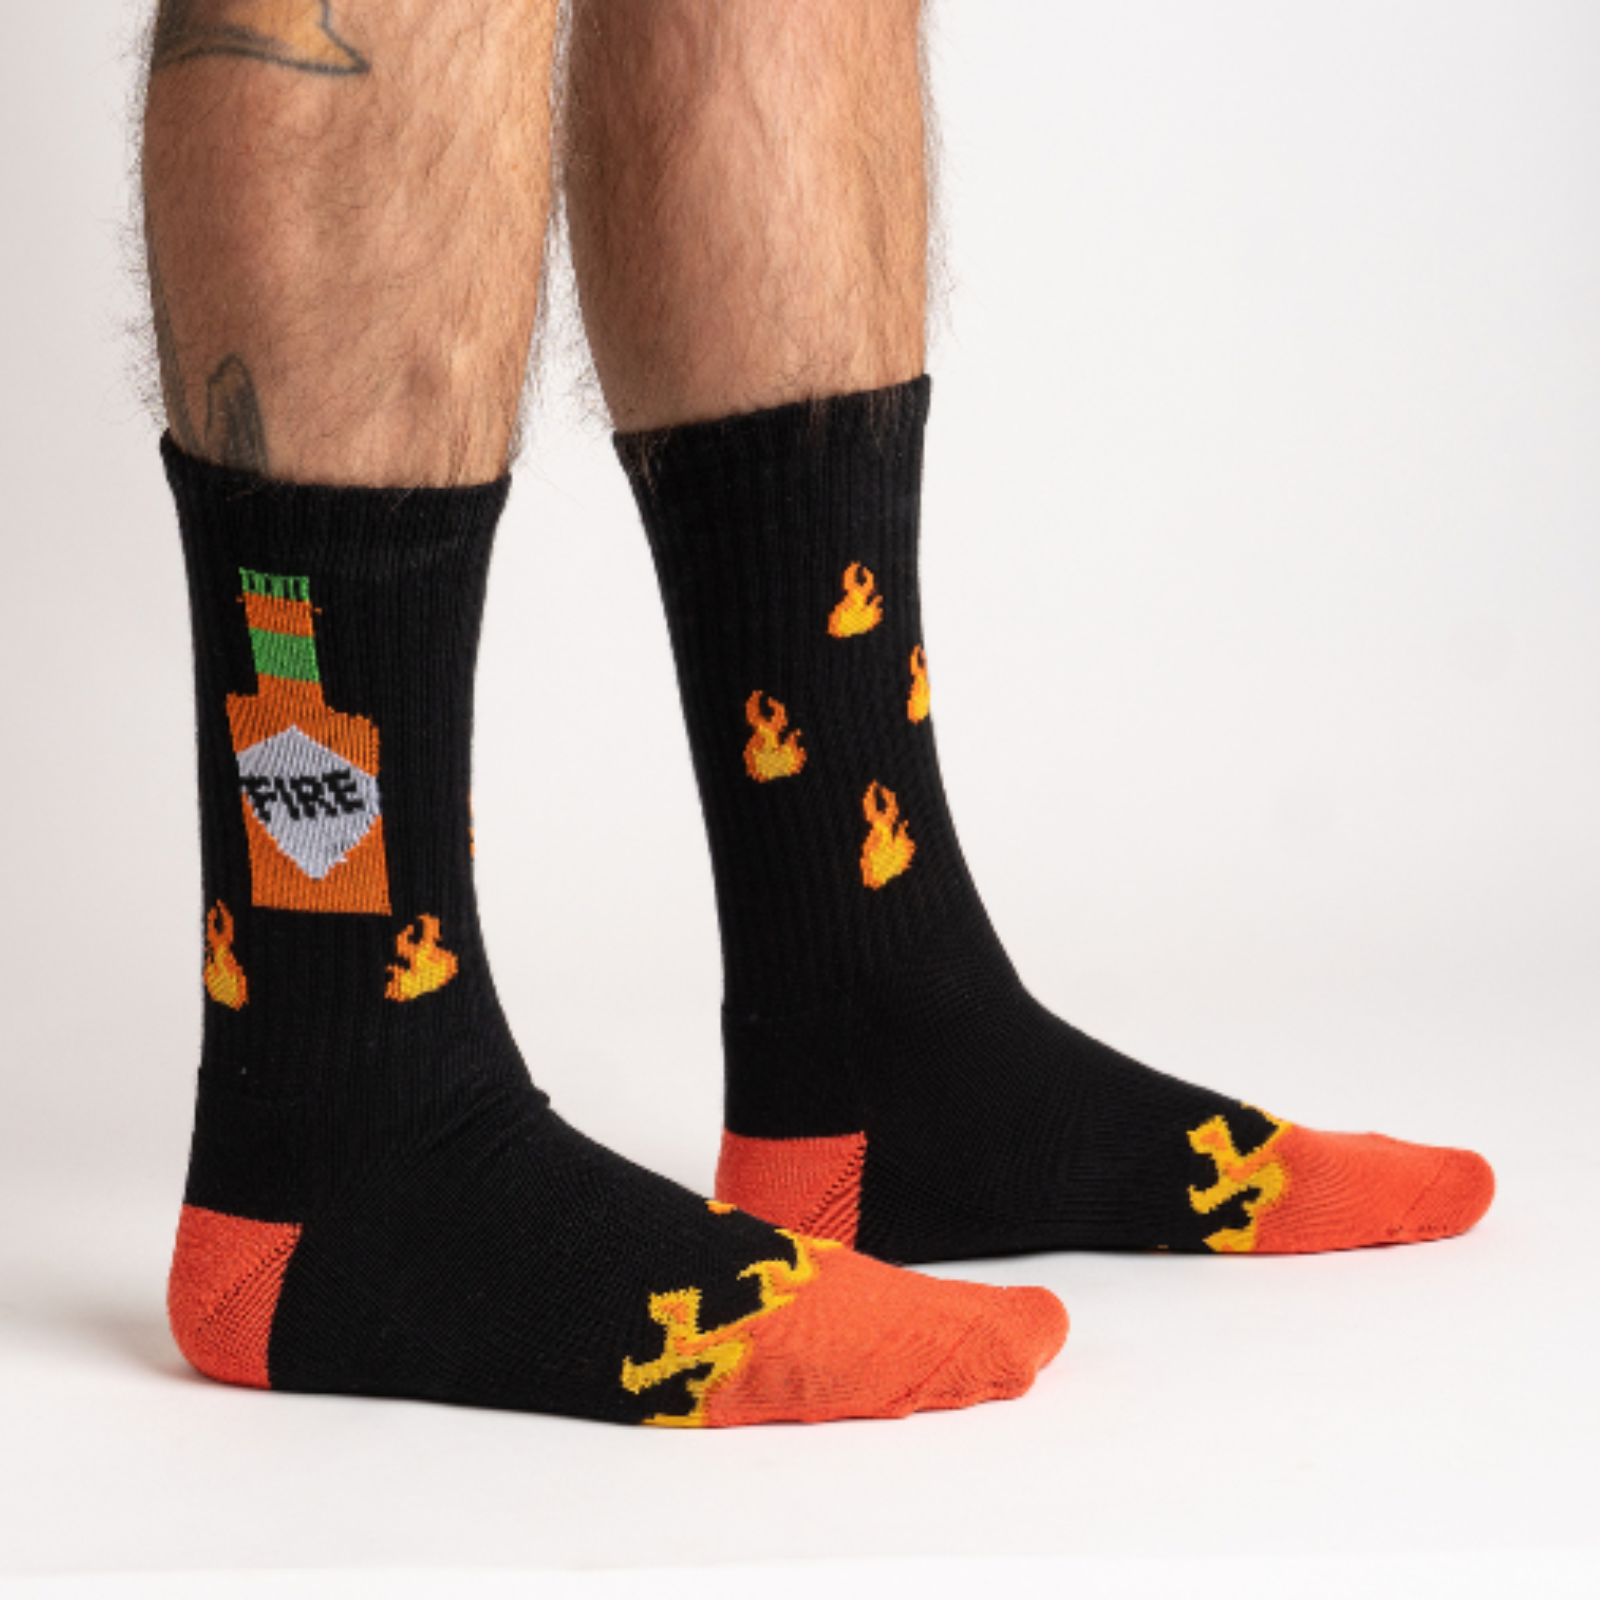 Sock It To Me Fire athletic crew men's sock featuring black socks with an image of flames and hot sauce bottle. Socks shown on model from side. 